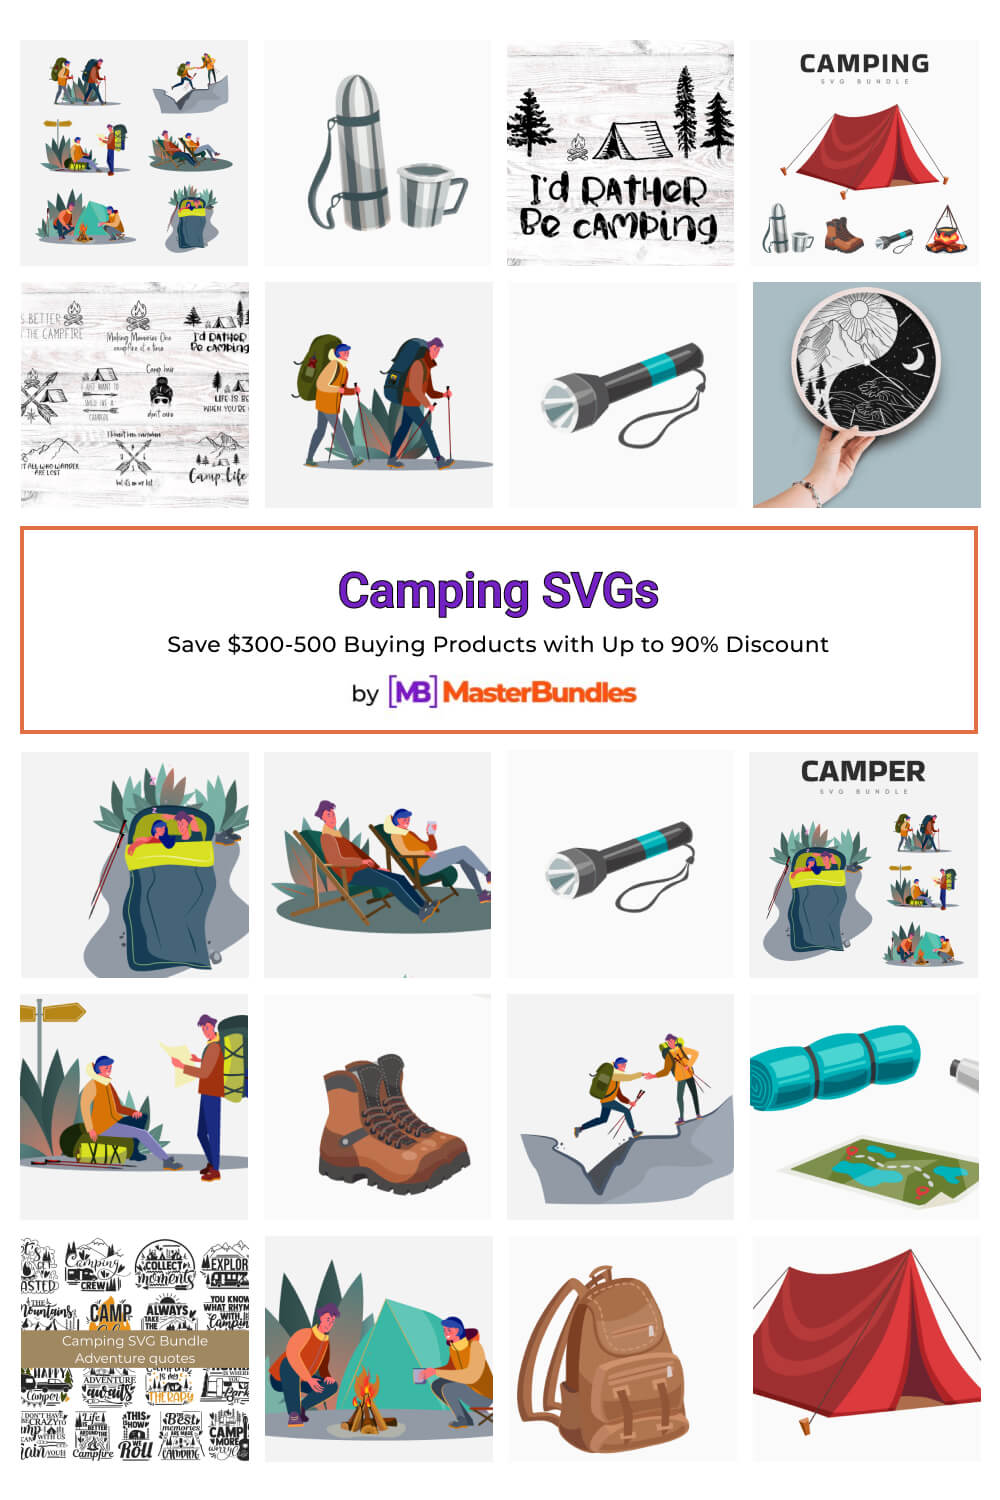 camping svgs pinterest image.